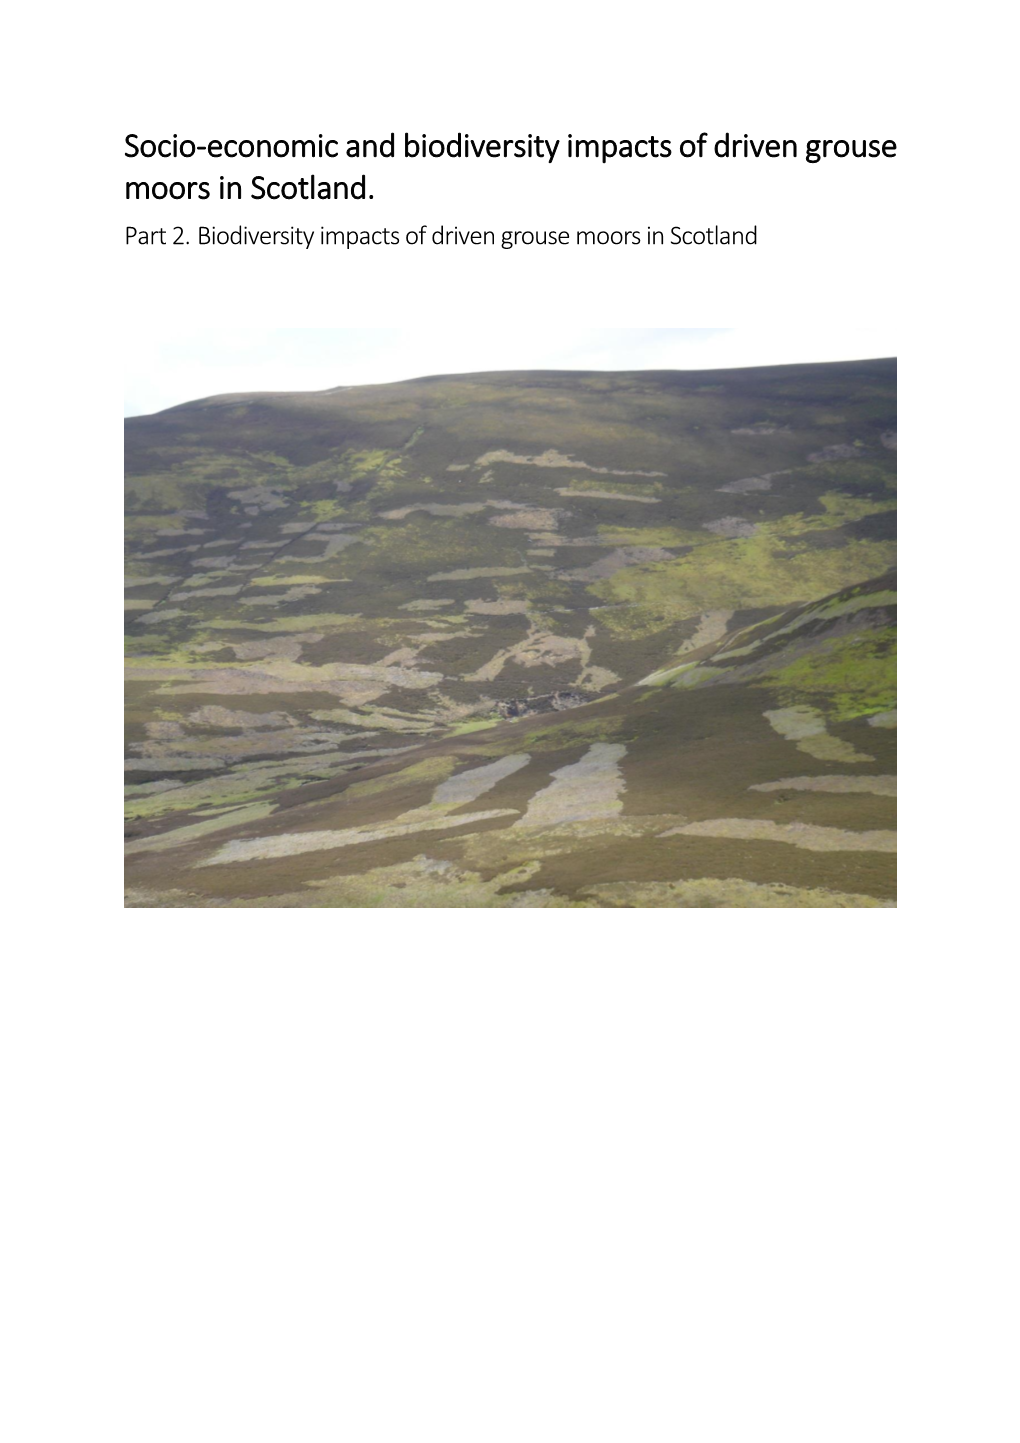 Part 2. Biodiversity Impacts of Driven Grouse Moors in Scotland